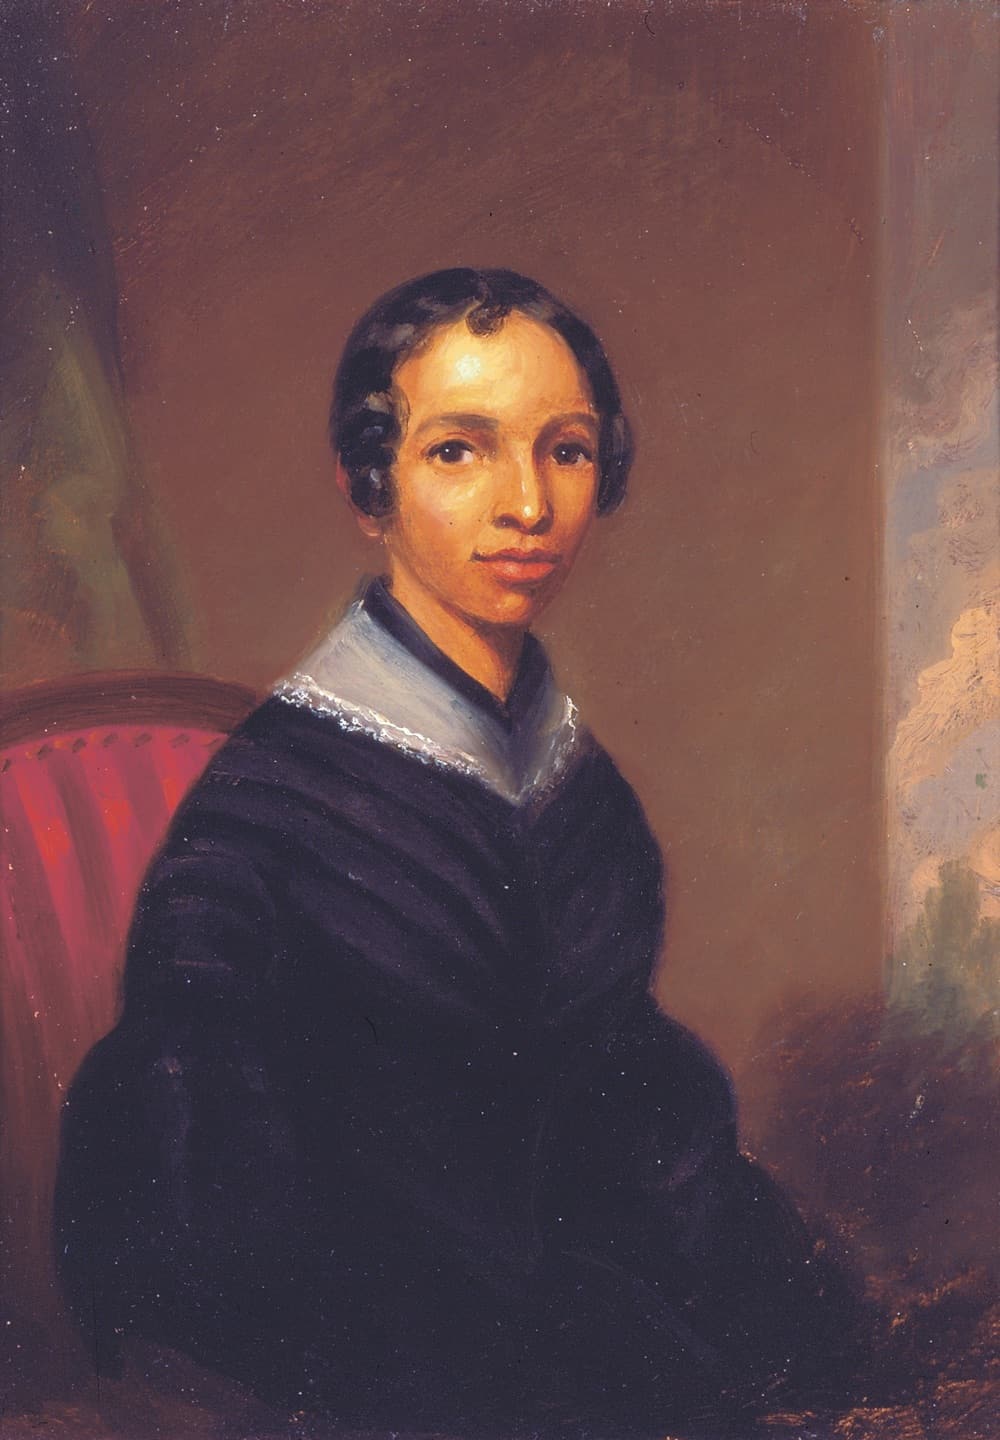 James Hamilton Shegogue, Untitled (portrait of an African American woman), undated. Oil on panel. Morris Museum of Art, Augusta, Georgia